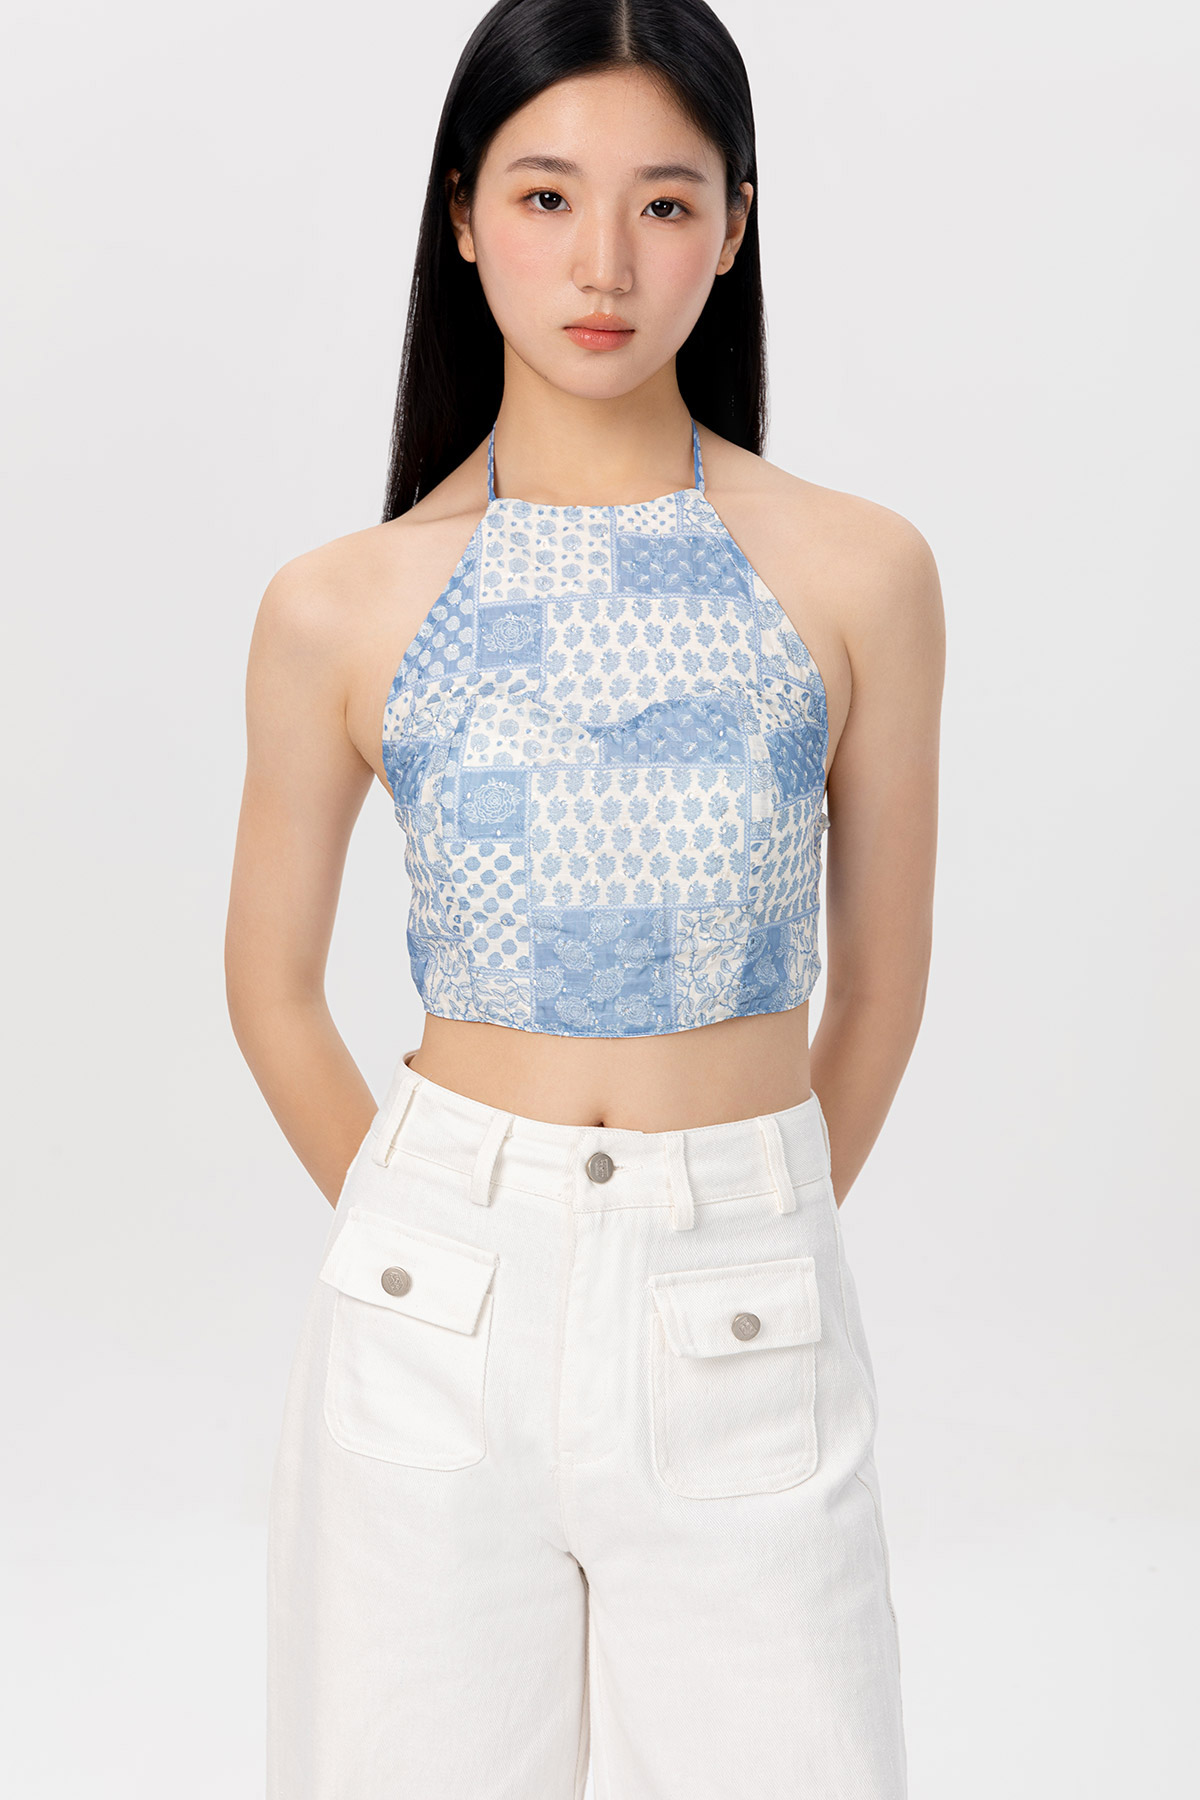 ABBY PADDED TOP - MEDLEY PATCHWORK [BY MODPARADE]